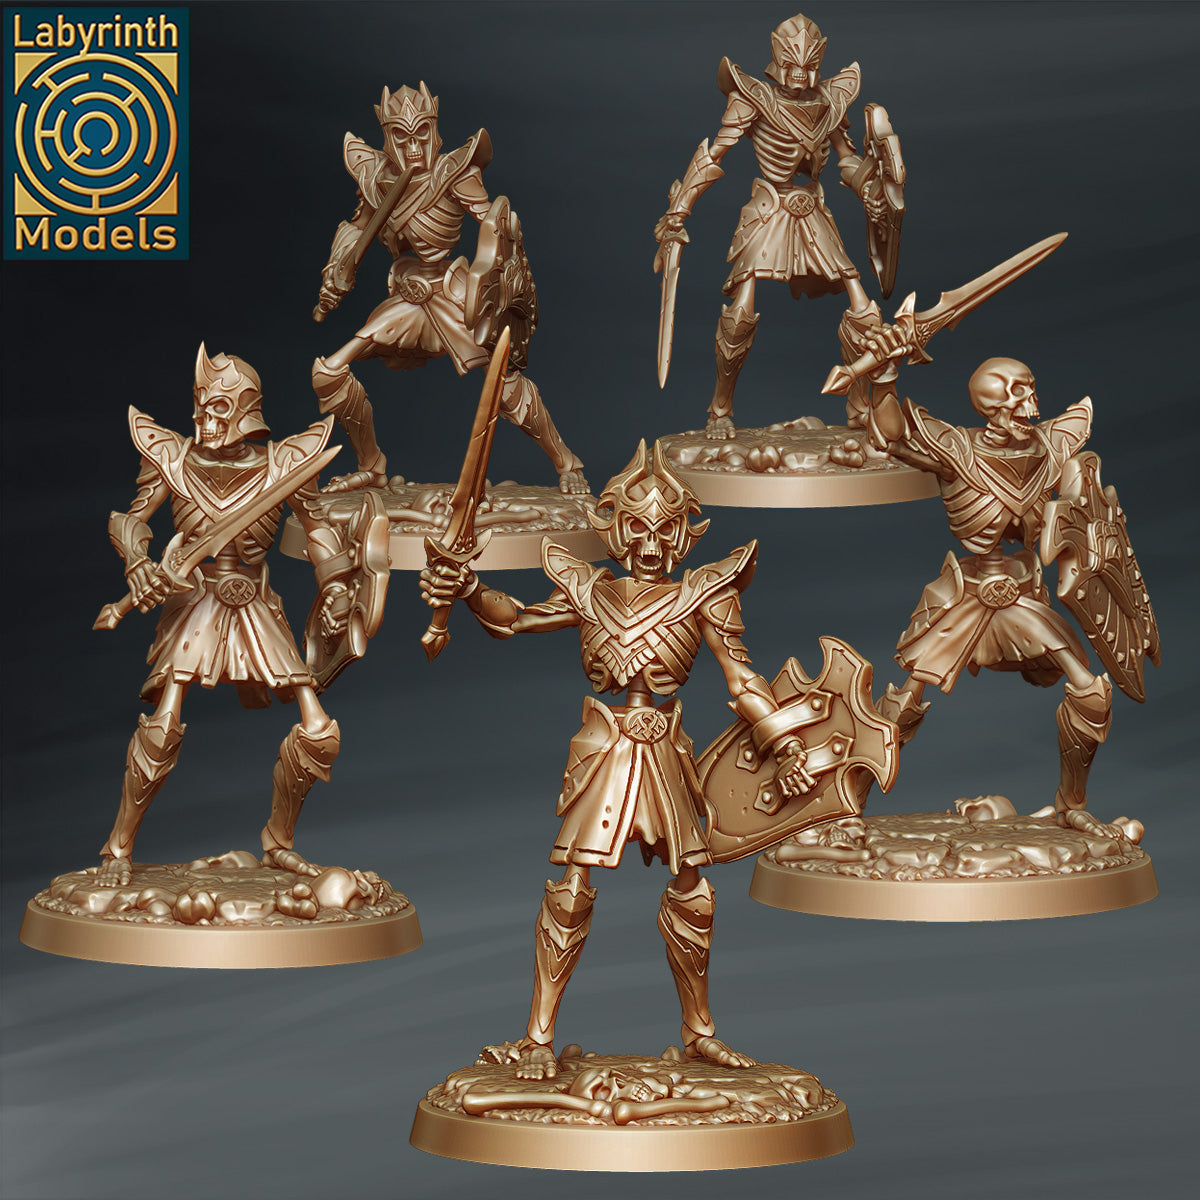 Crypt Knights by Labyrinth Models